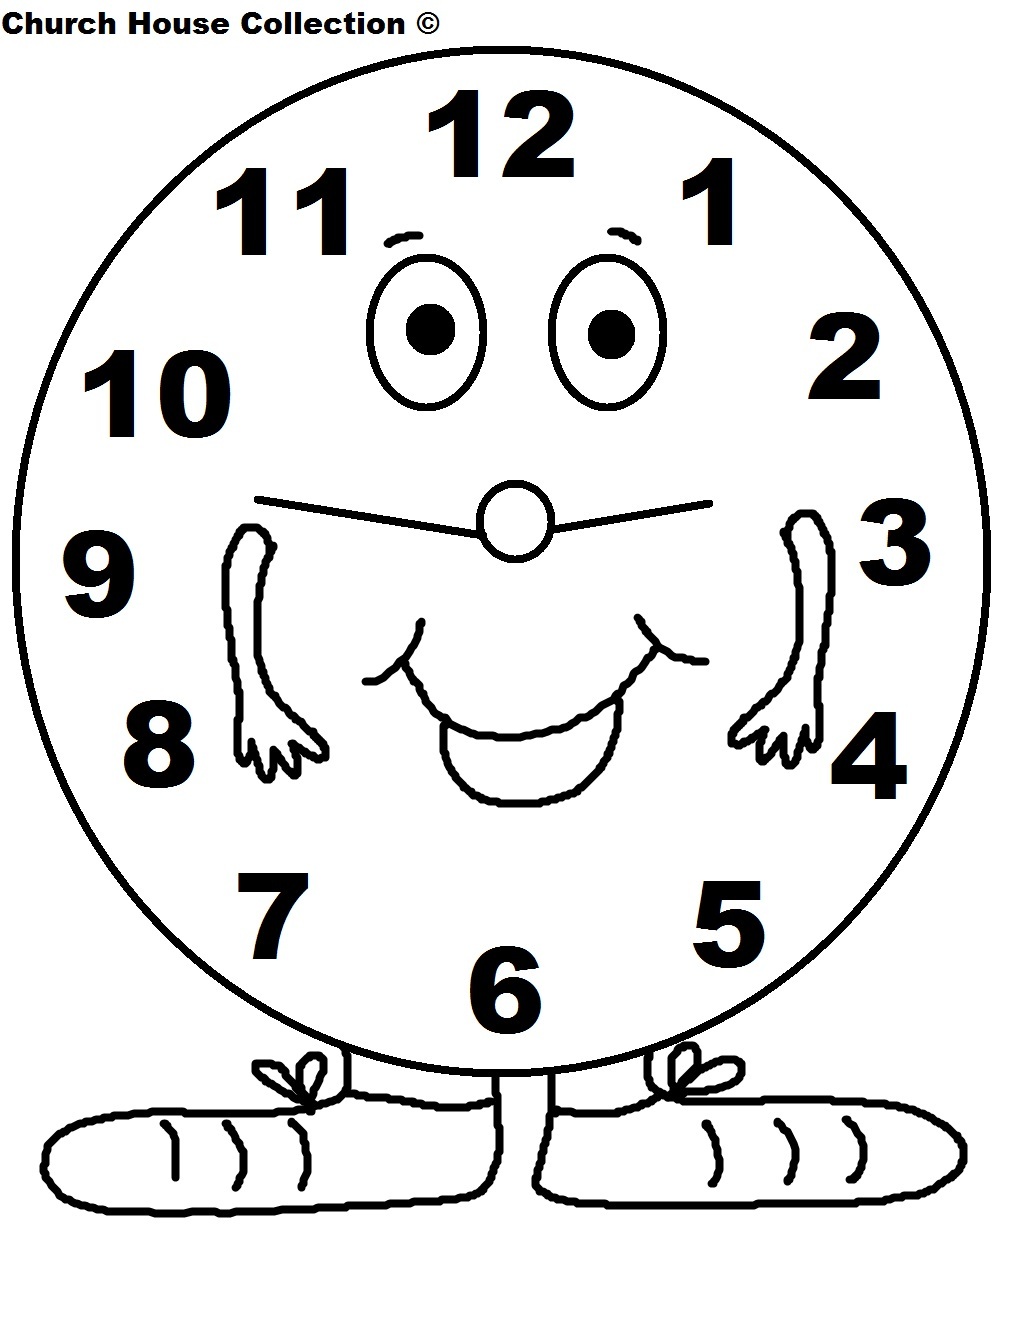 Daylight Saving Time Coloring Pages